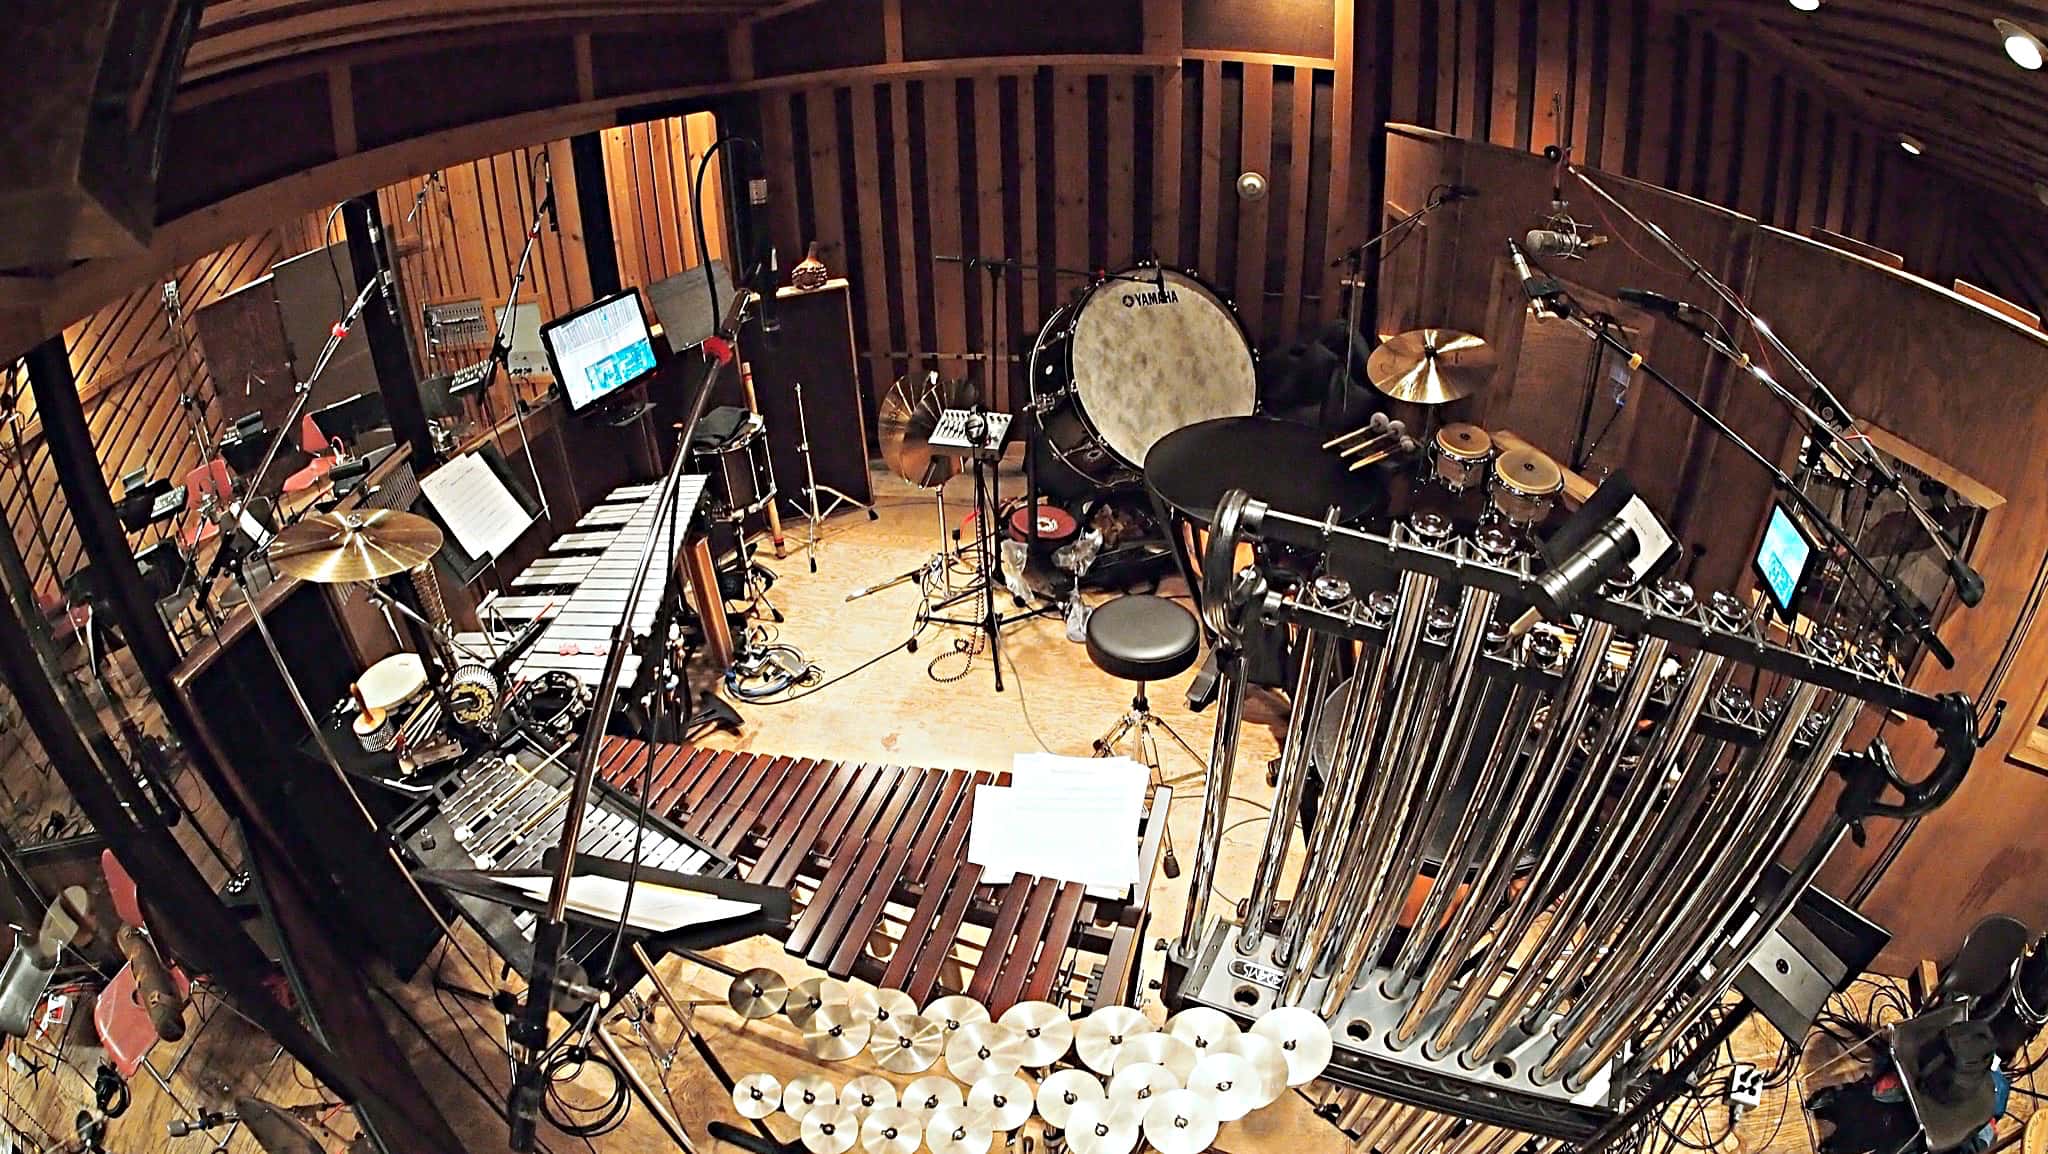 Bill Hayes' percussion setup for the recording session of NBC’s Peter Pan Live at Avatar Studios, in New York City.